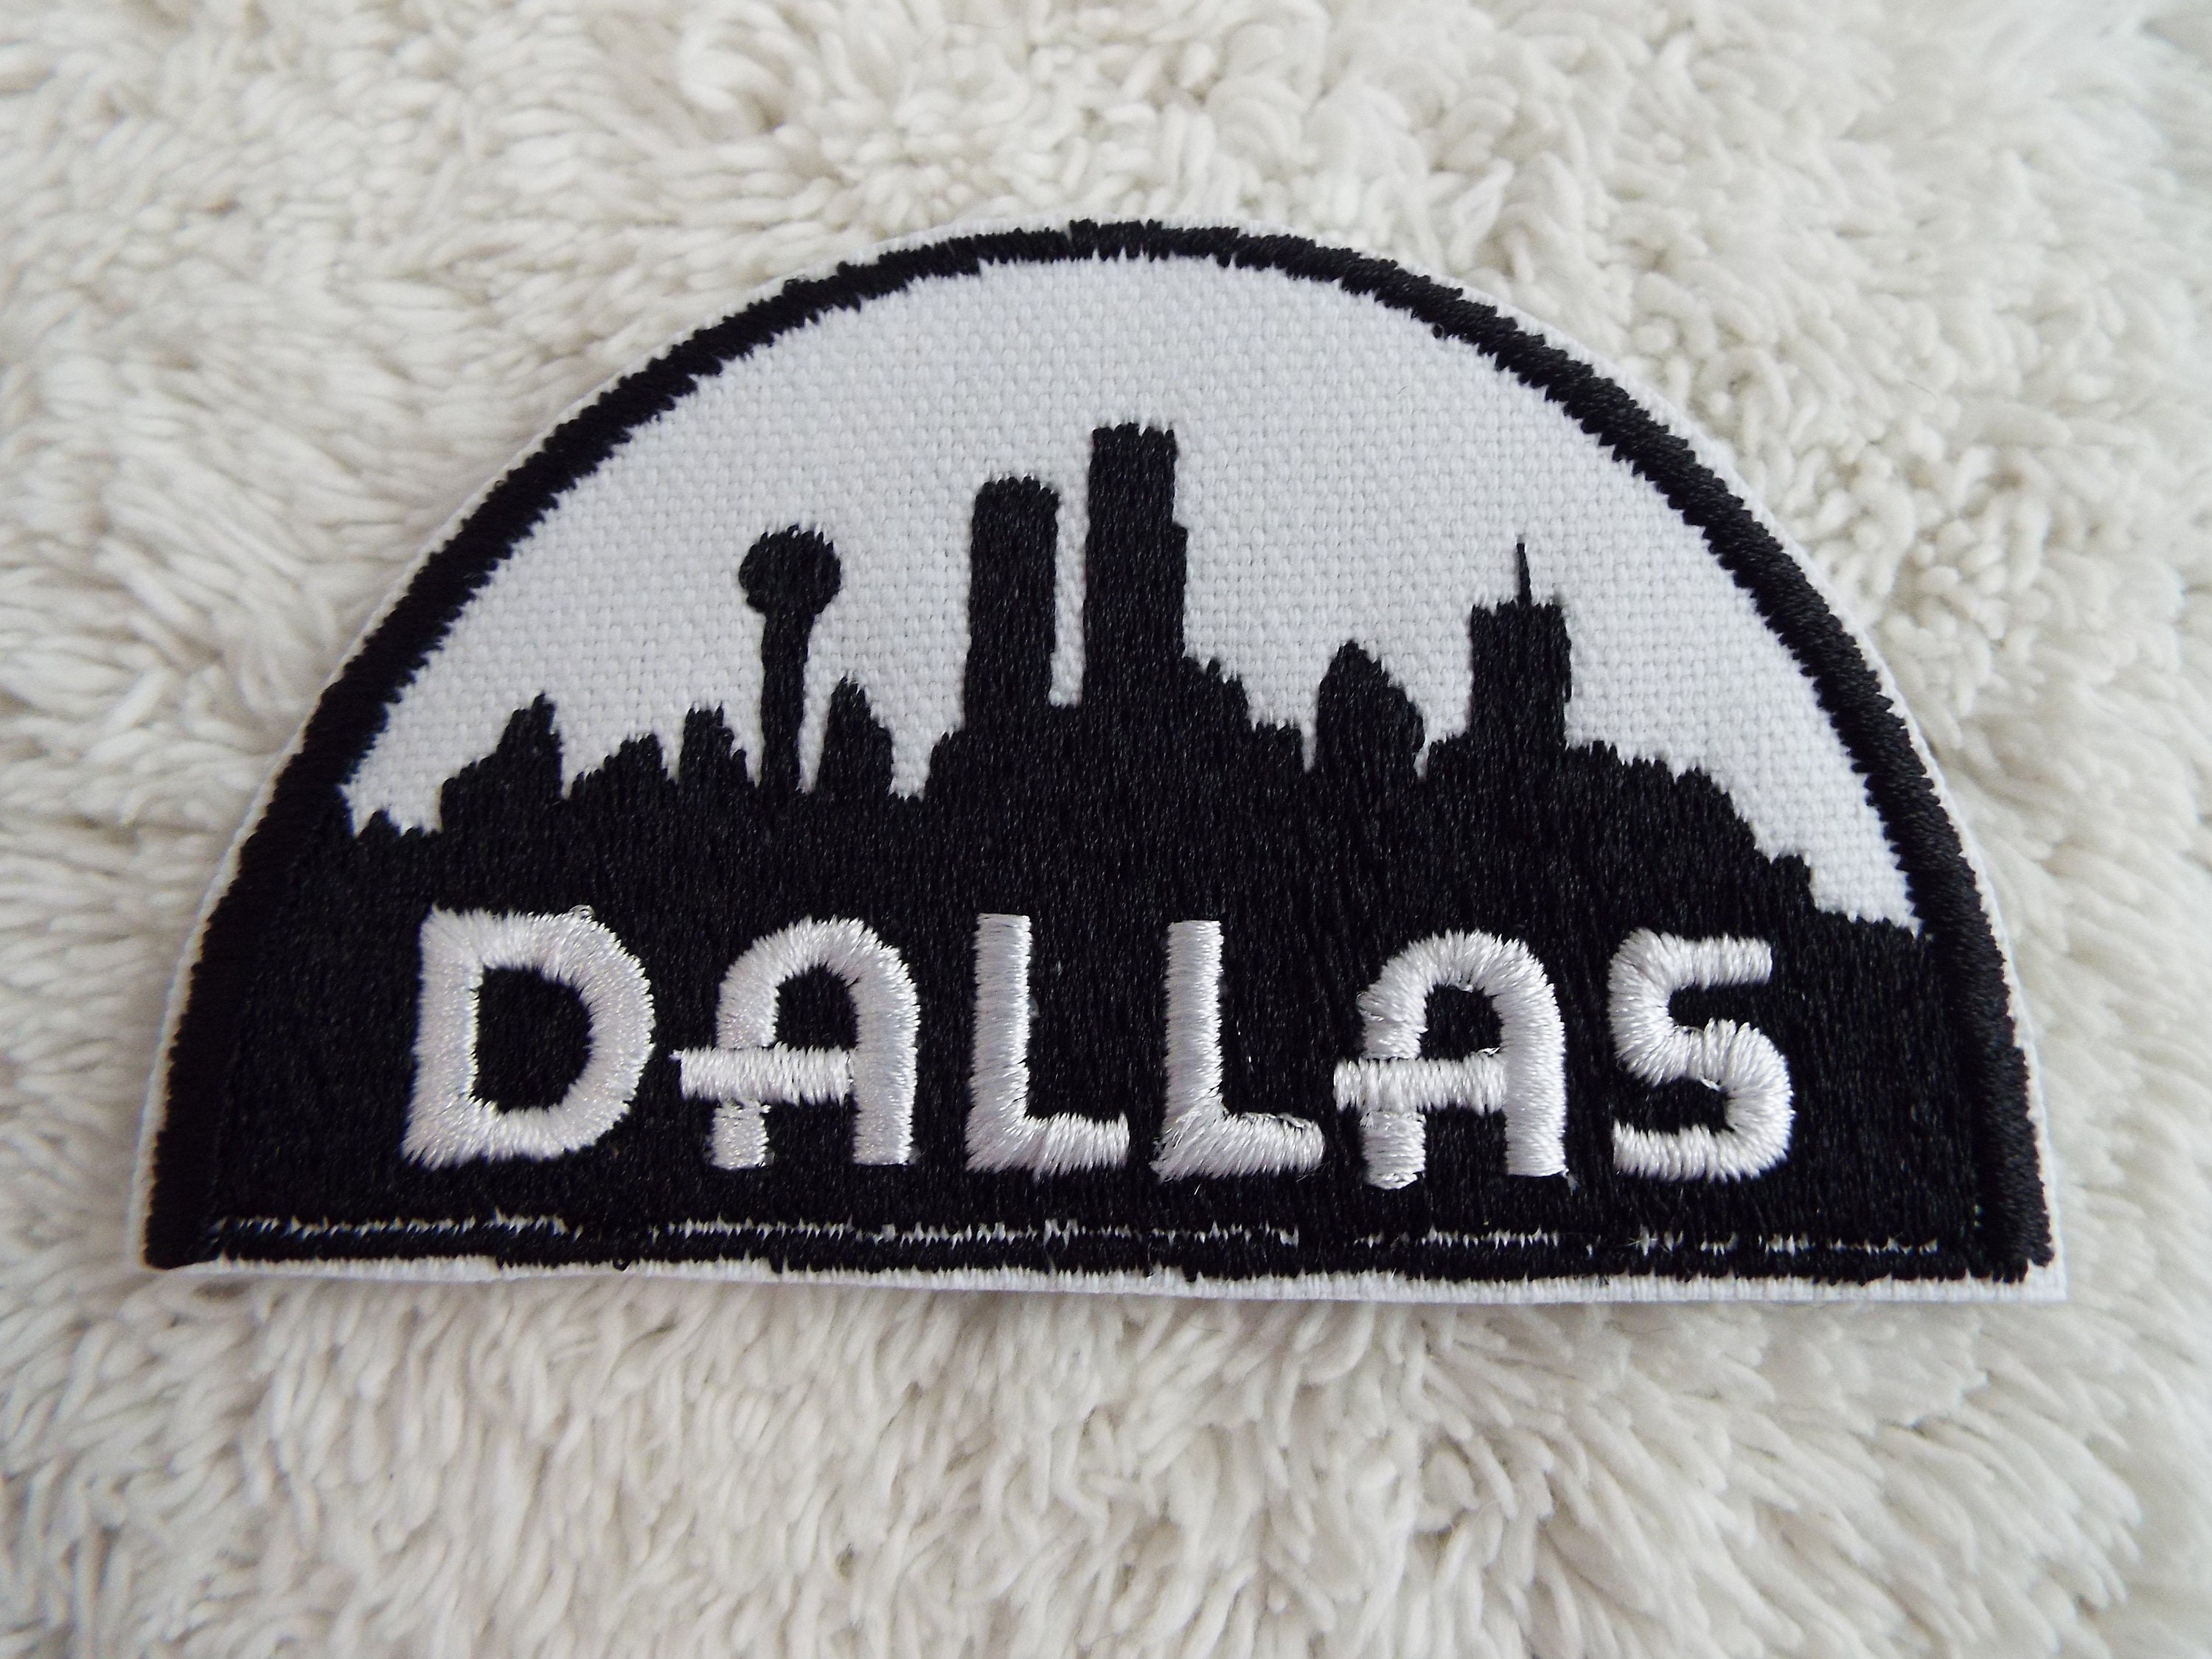  Dallas Star Embroidered Patch Appliqué. Iron On, Black with  White Satin. Size 2.4 (63mm)